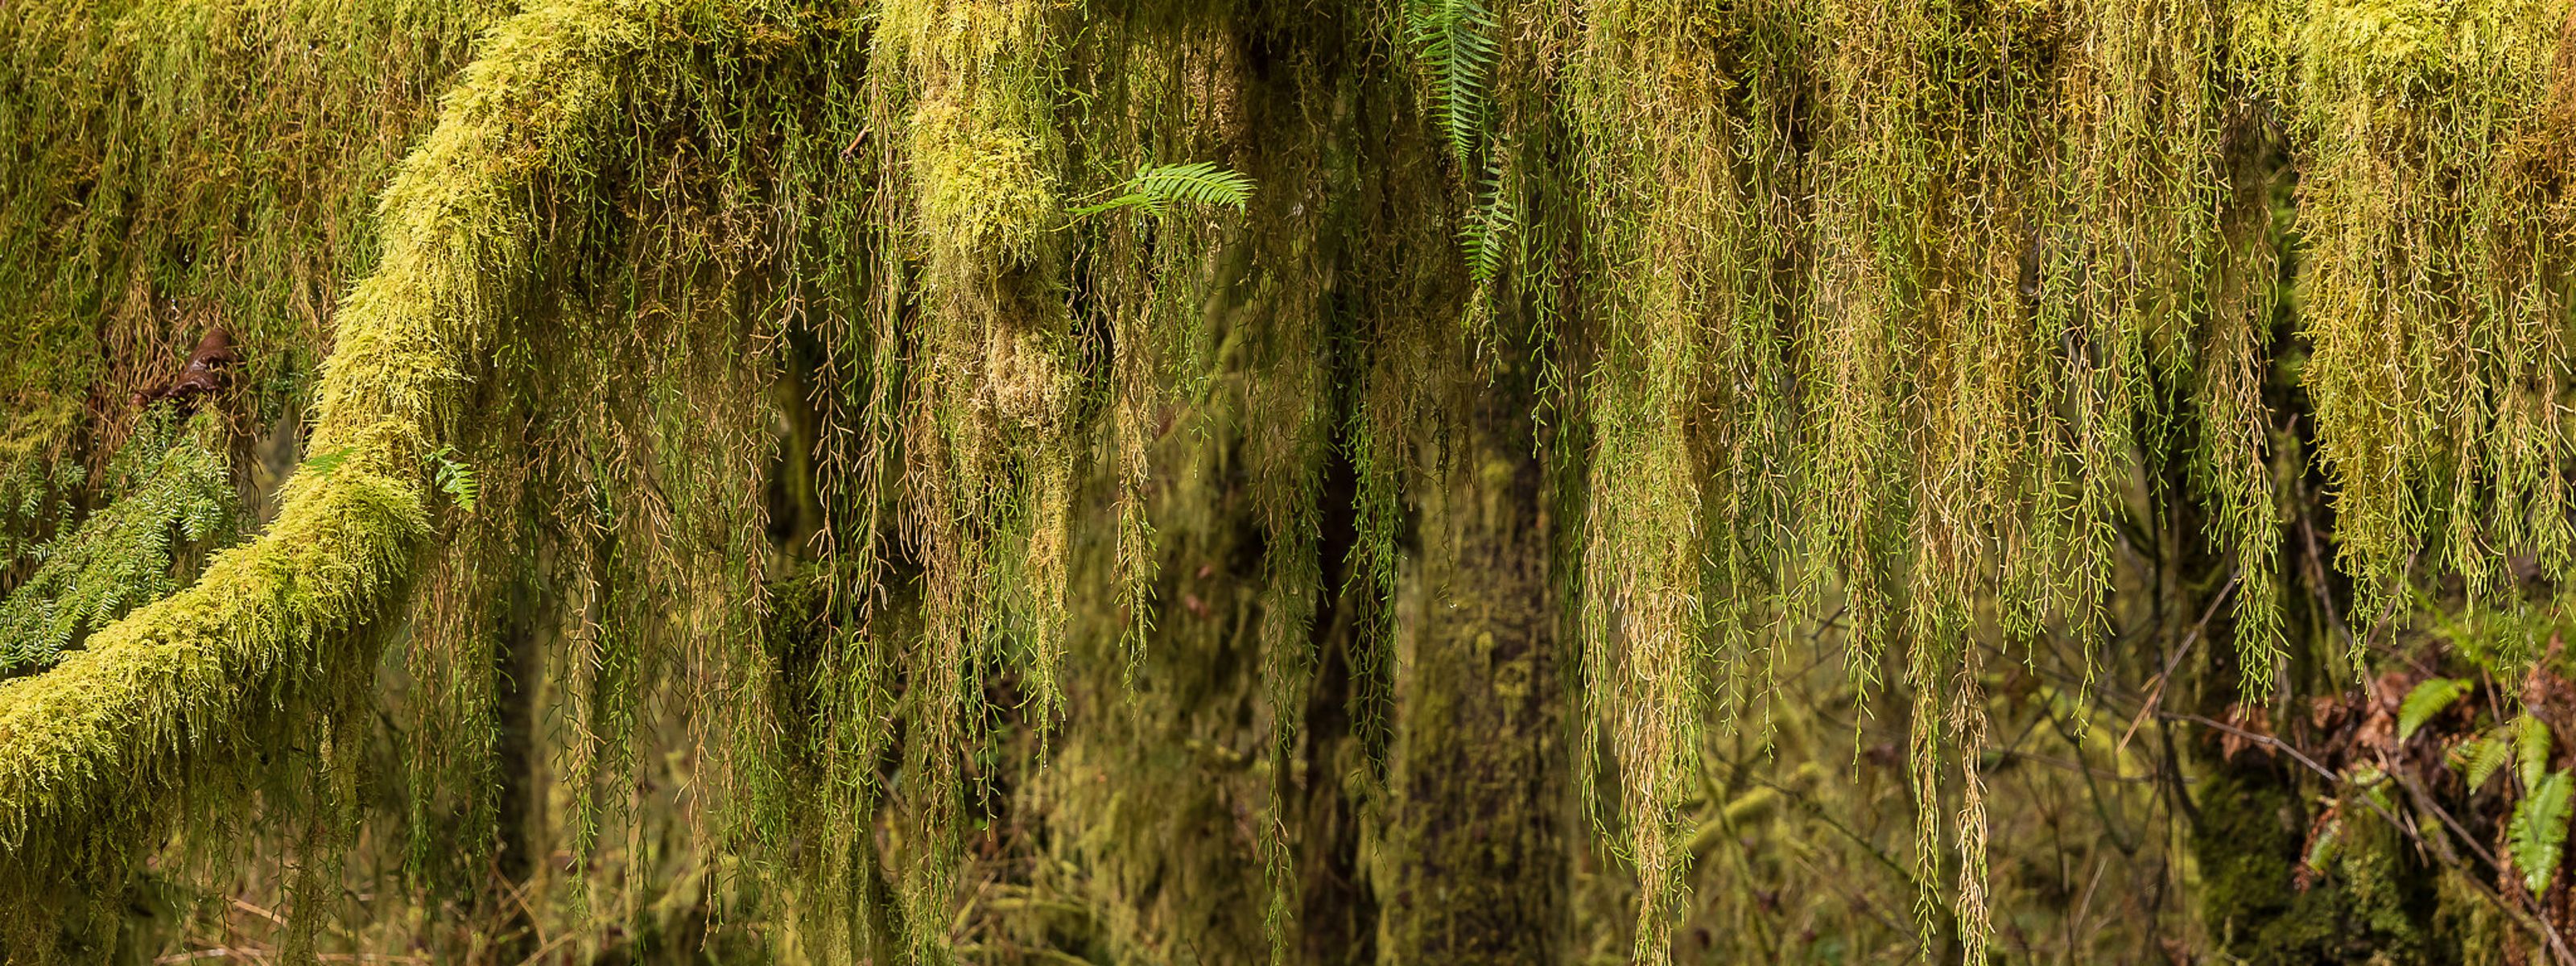 Closeup view of moss draped over and hanging from tree branches.